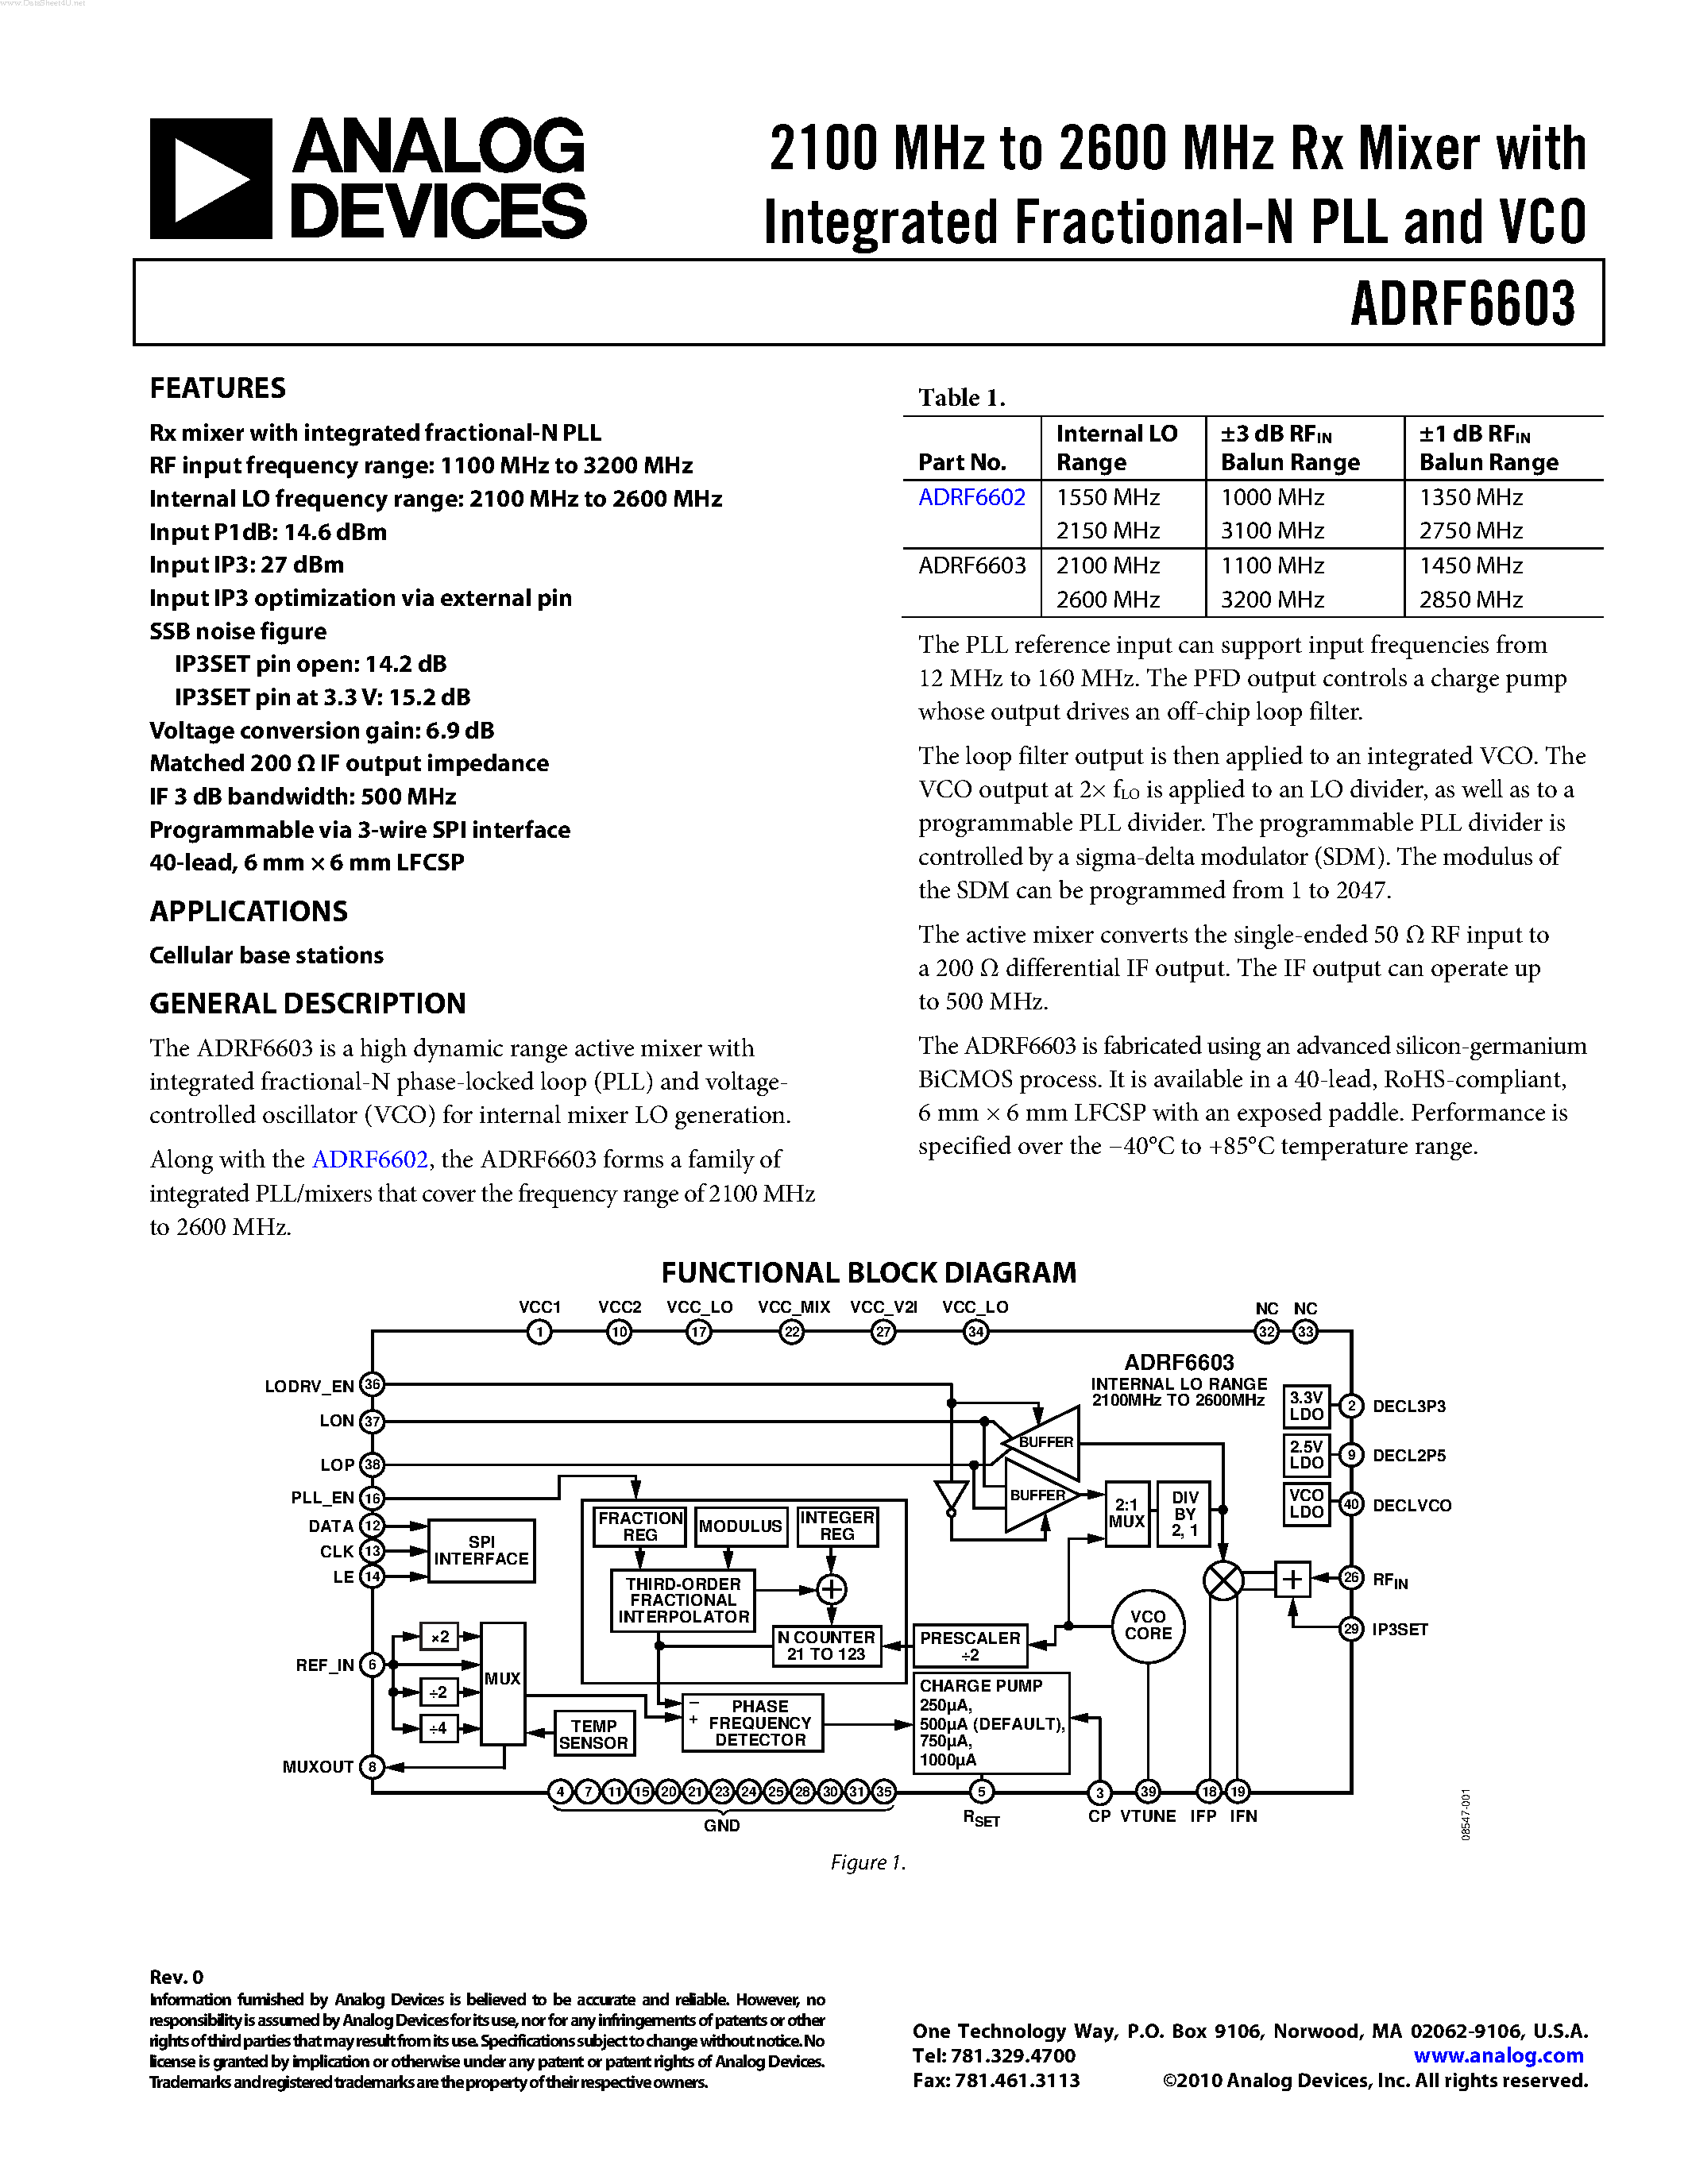 Даташит ADRF6603 - 2100 MHz to 2600 MHz Rx Mixer страница 1